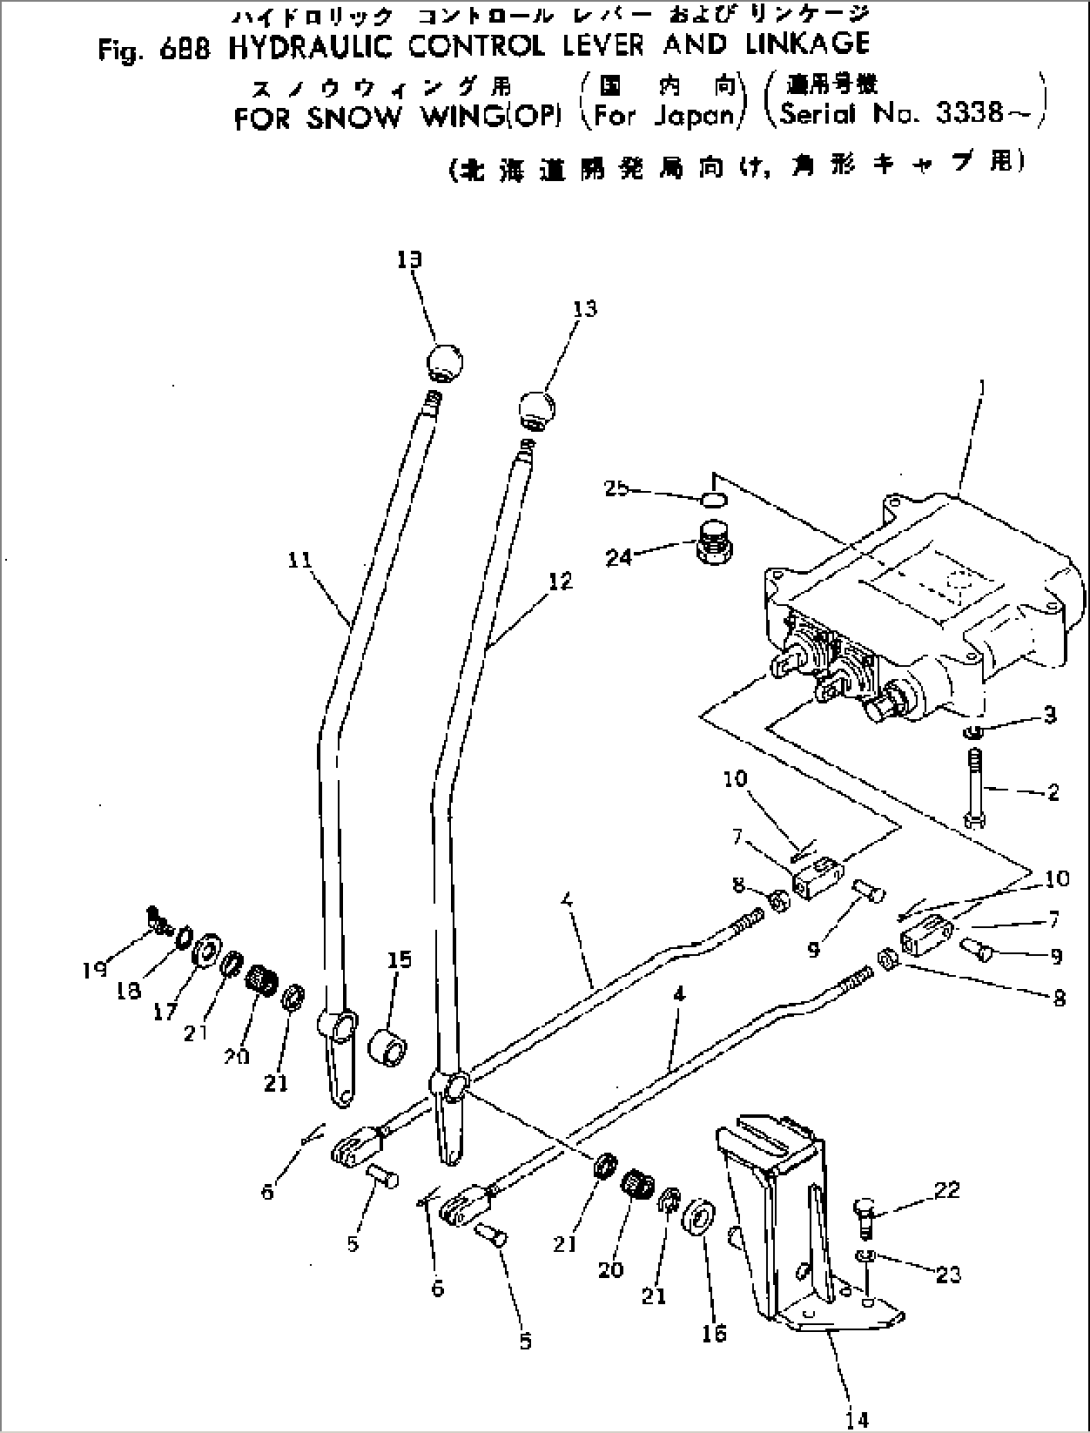 HYDRAULIC CONTROL LEVER AND LINKAGE FOR SNOW WING (OP)(#3338-)